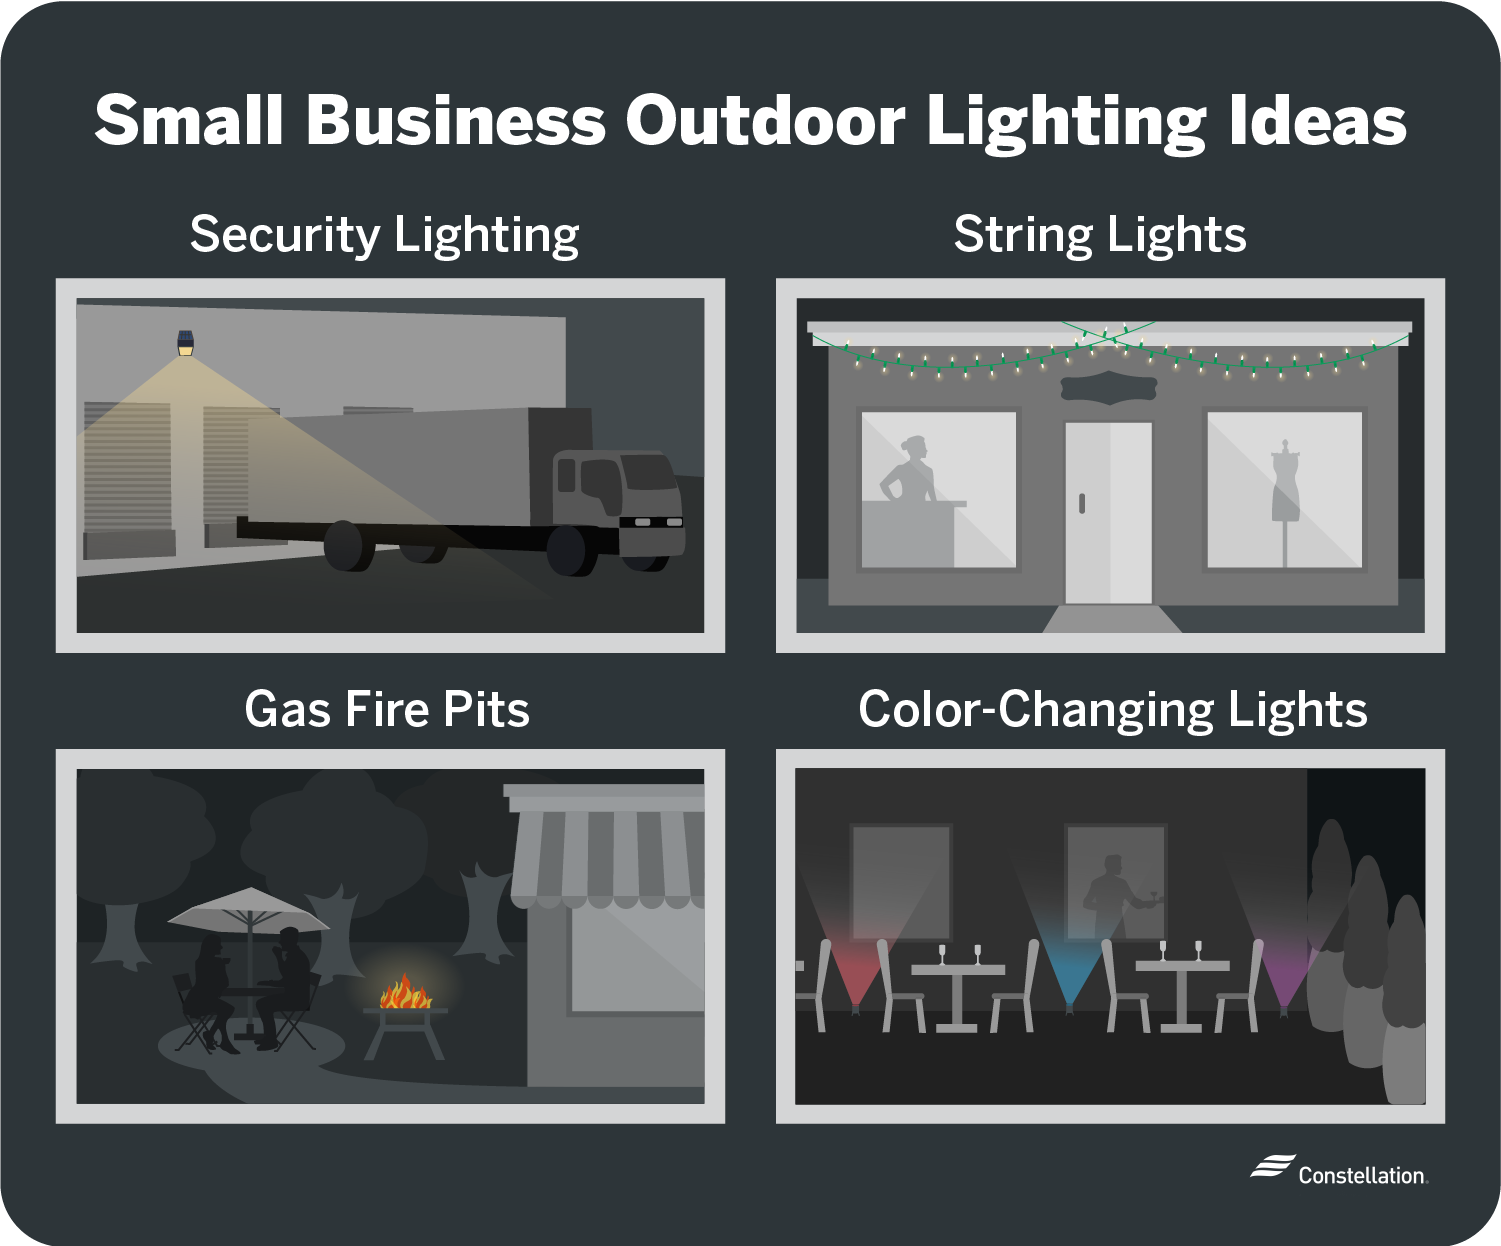 Small business outdoor lighting ideas include security lighting, string lights, gas fire pits, and color-changing lights